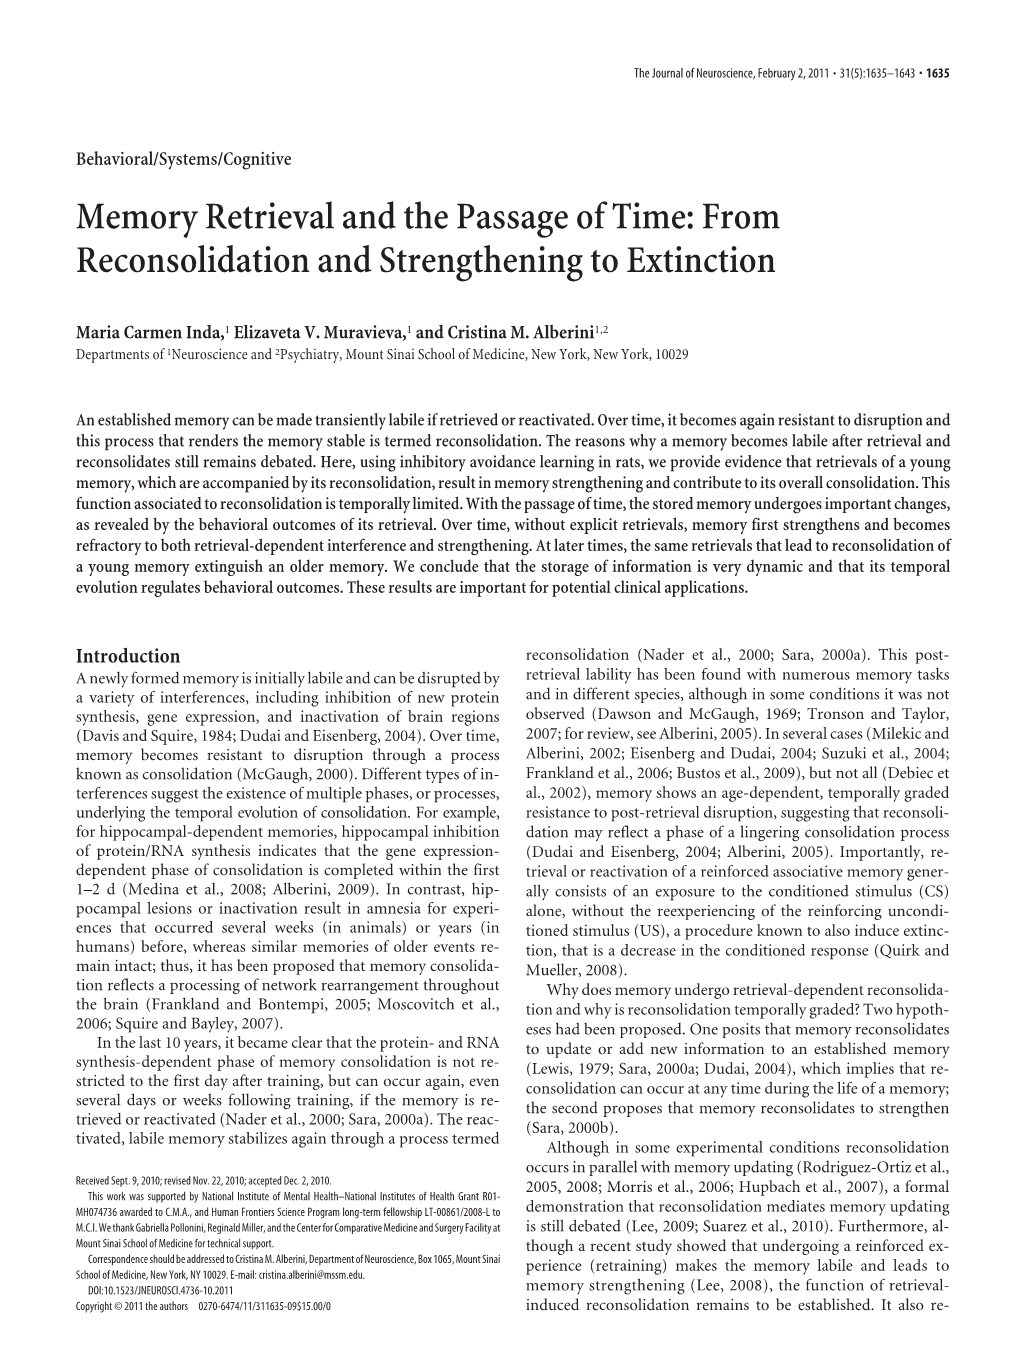 Memory Retrieval and the Passage of Time: from Reconsolidation and Strengthening to Extinction